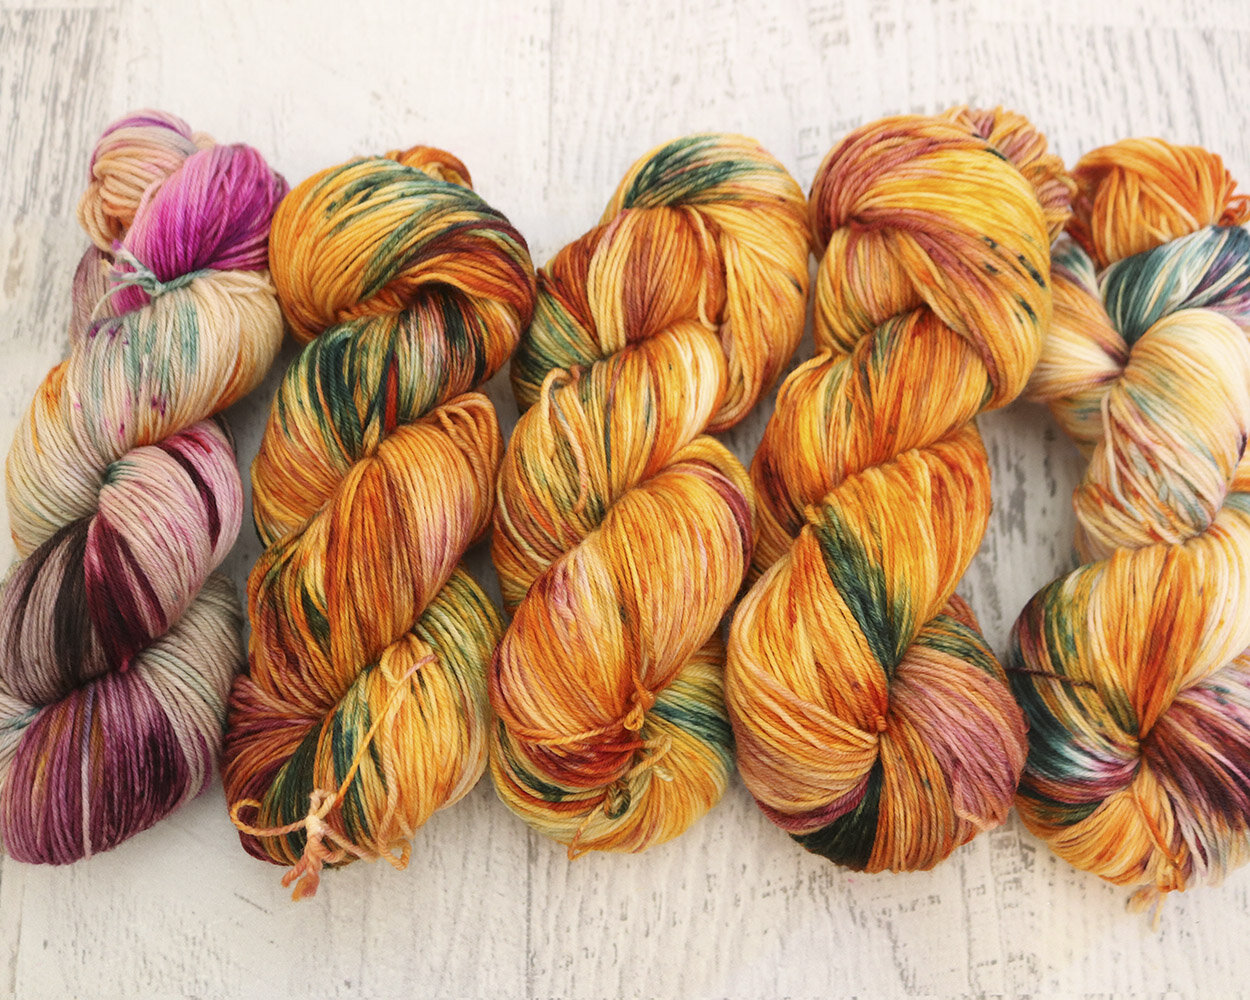 Color Curiosity: What Is Going on with those Skeins? – Modern Daily Knitting